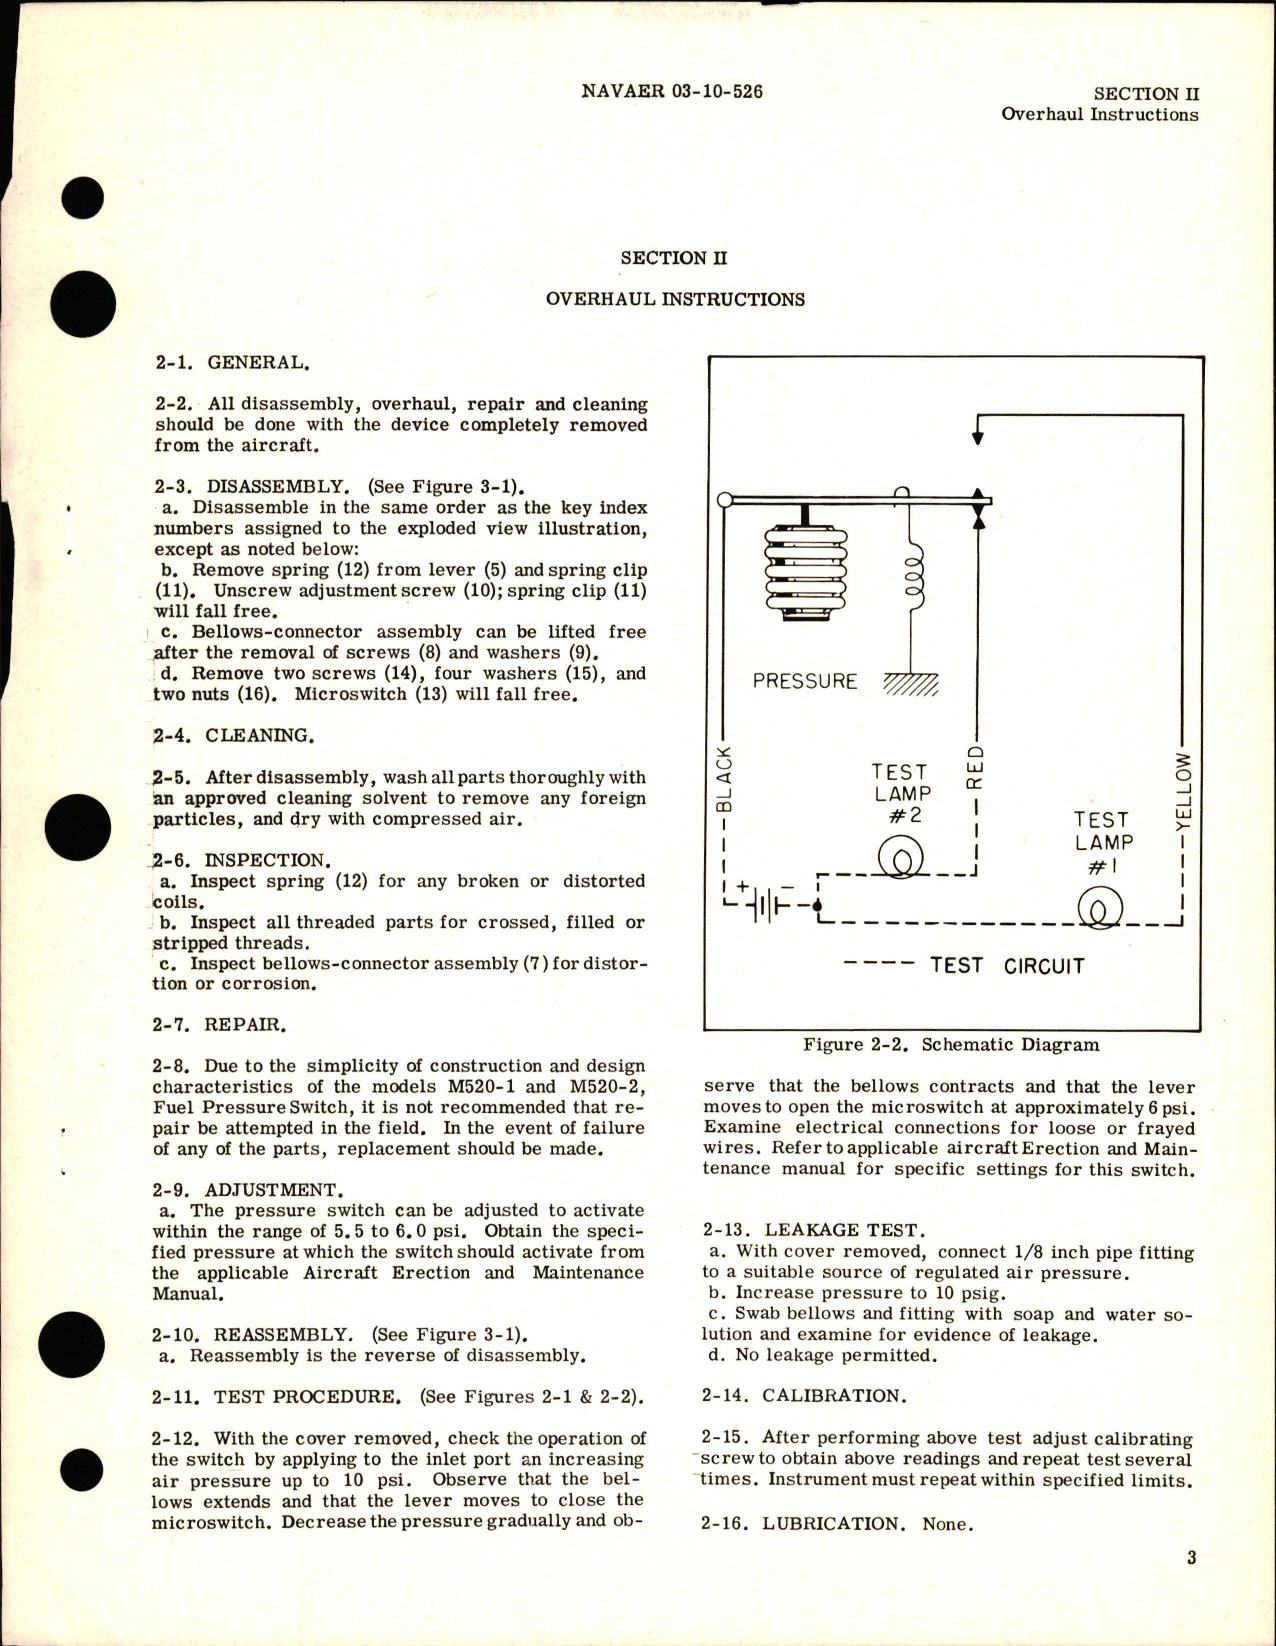 Sample page 5 from AirCorps Library document: Operation, Service, and Overhaul Instructions with Parts Catalog for Fuel Pressure Switches - Parts M520-1 and M520-2